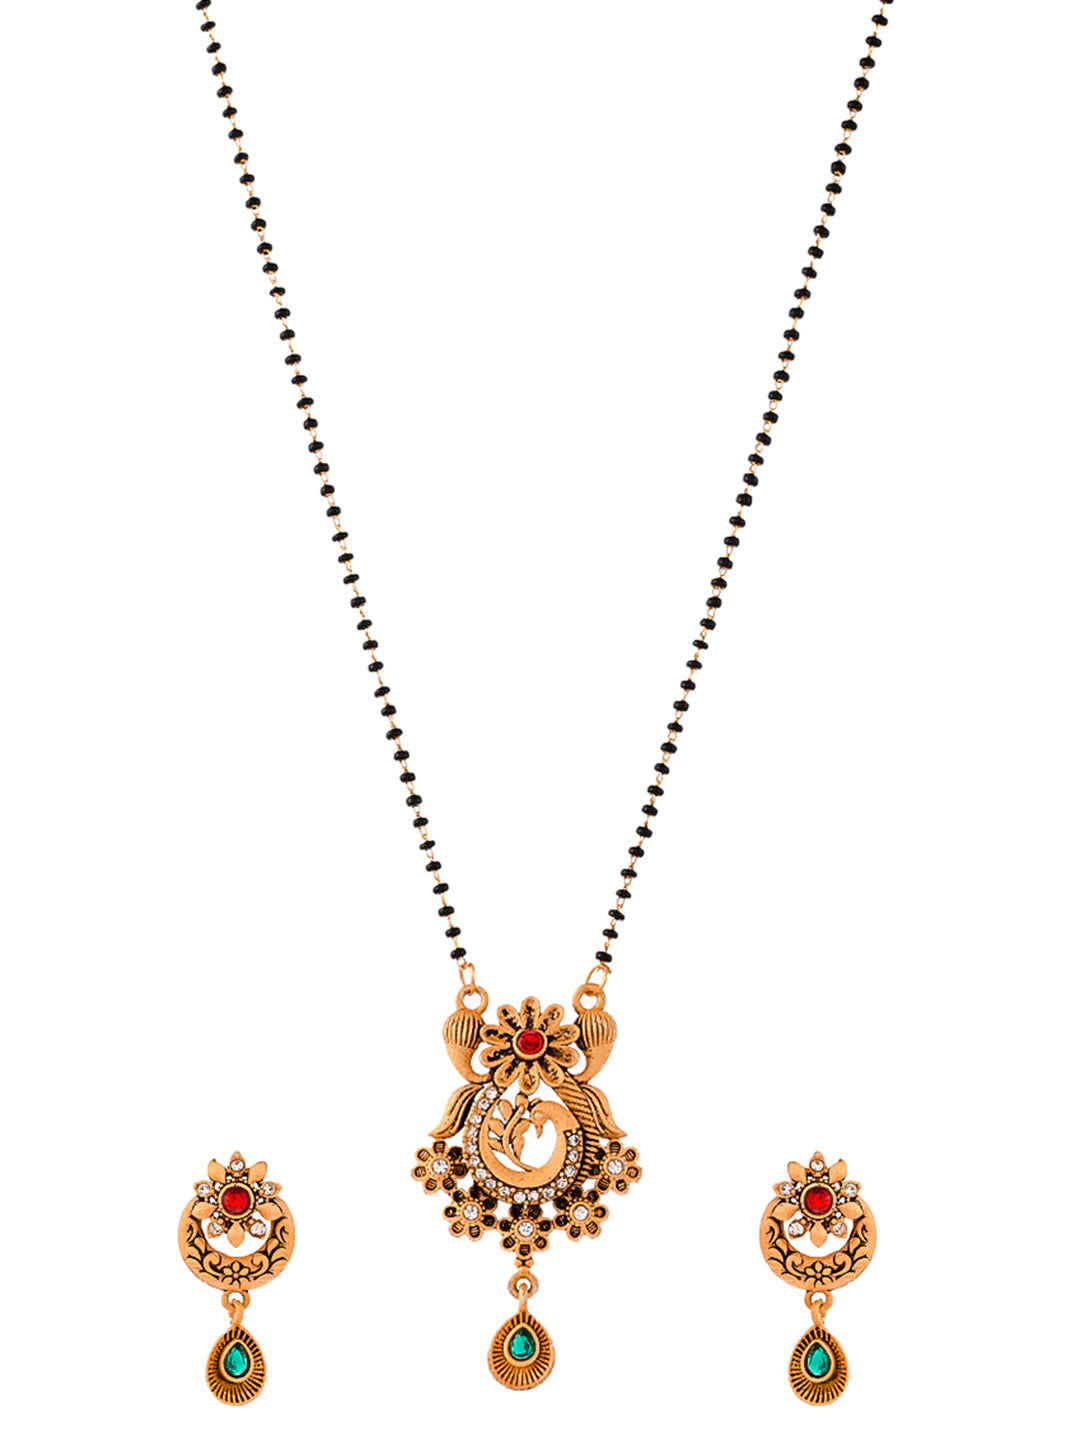 Daily Wear Gold Mangalsutra Designs Buy 1 Mangalsutra Get 2 Earring Free  combo